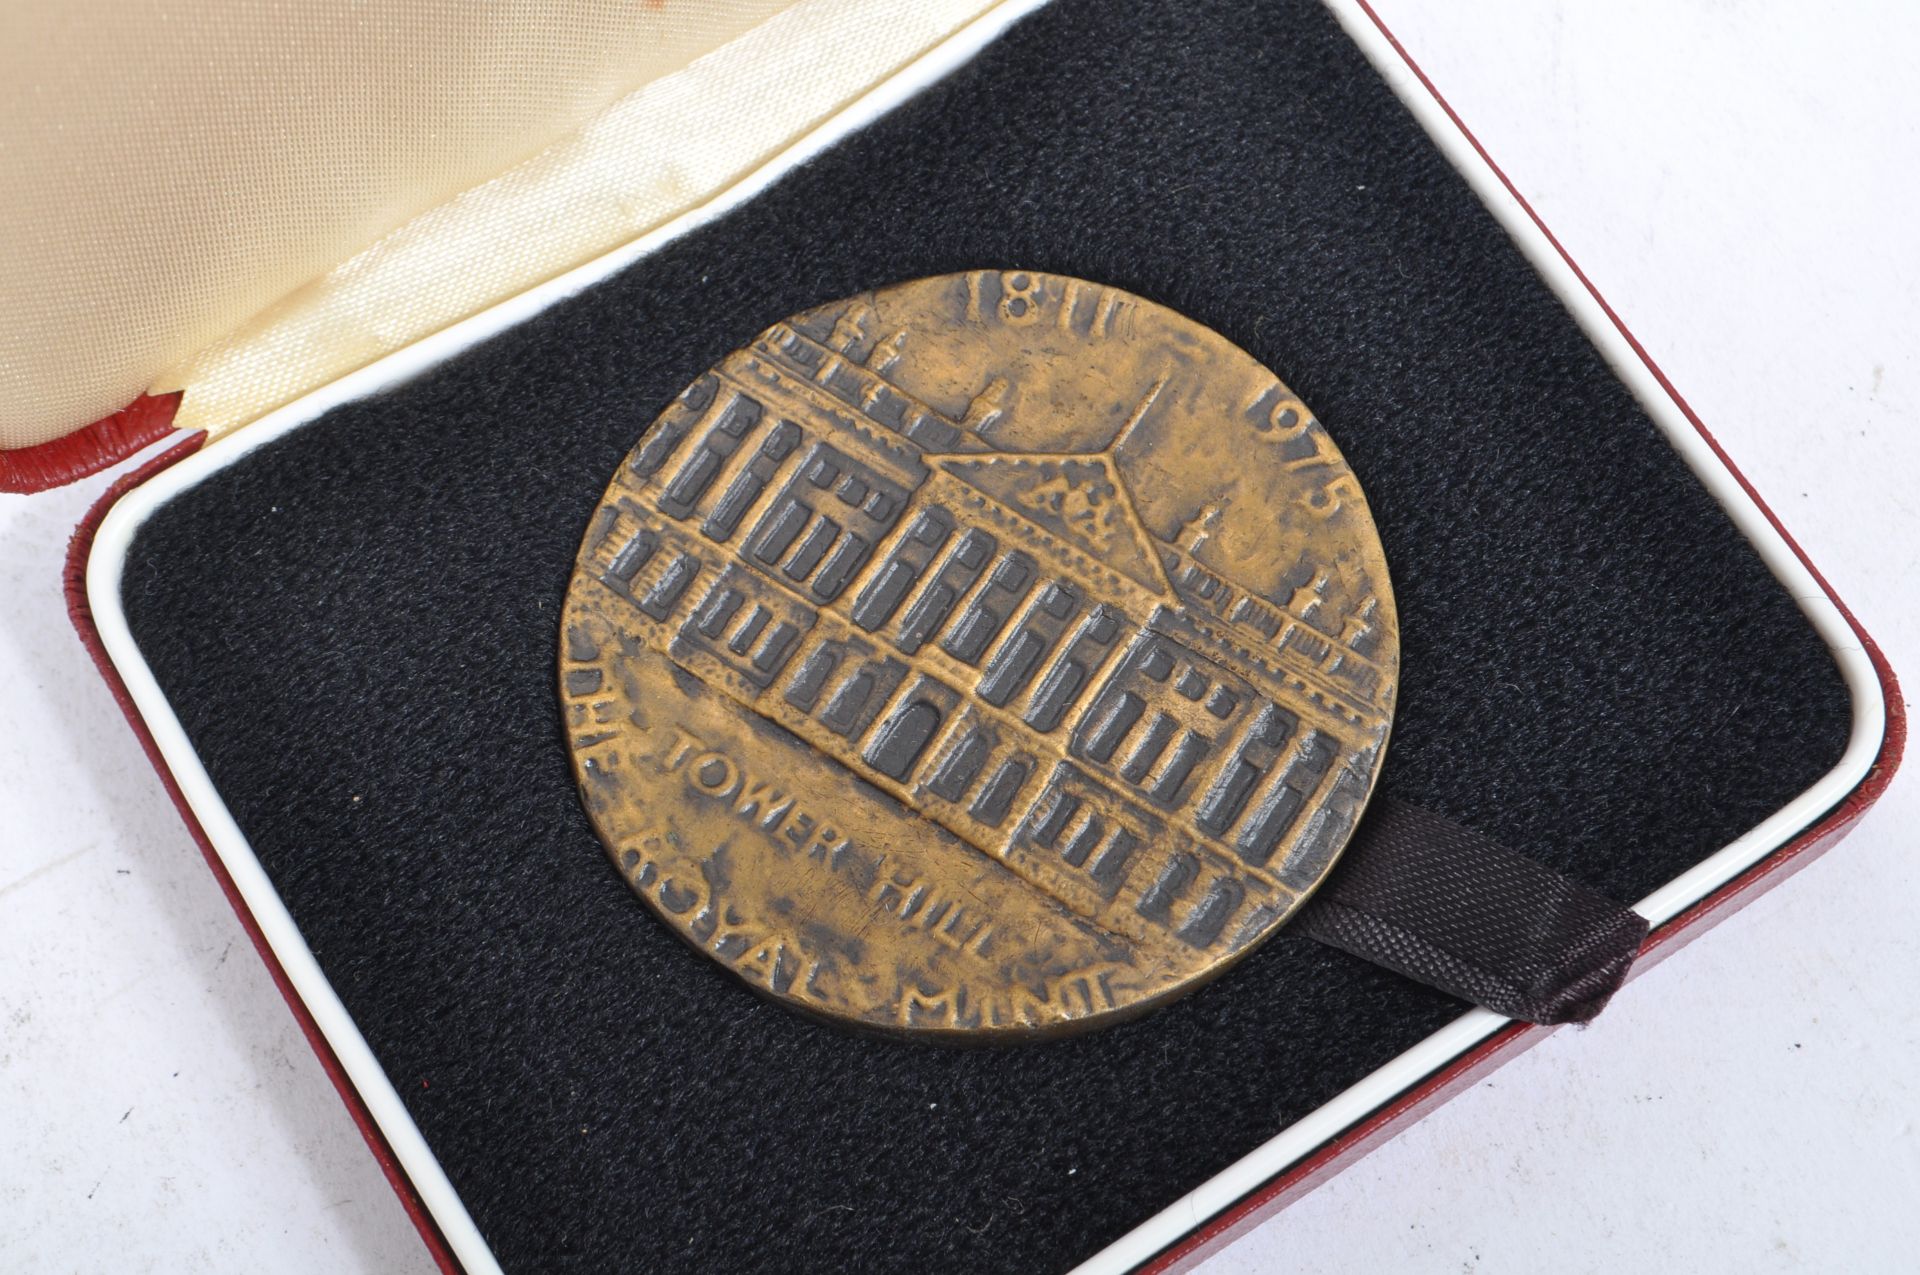 1975 ROYAL MINT TOWER HILL END OF PRODUCTION MEDALS - Image 4 of 7